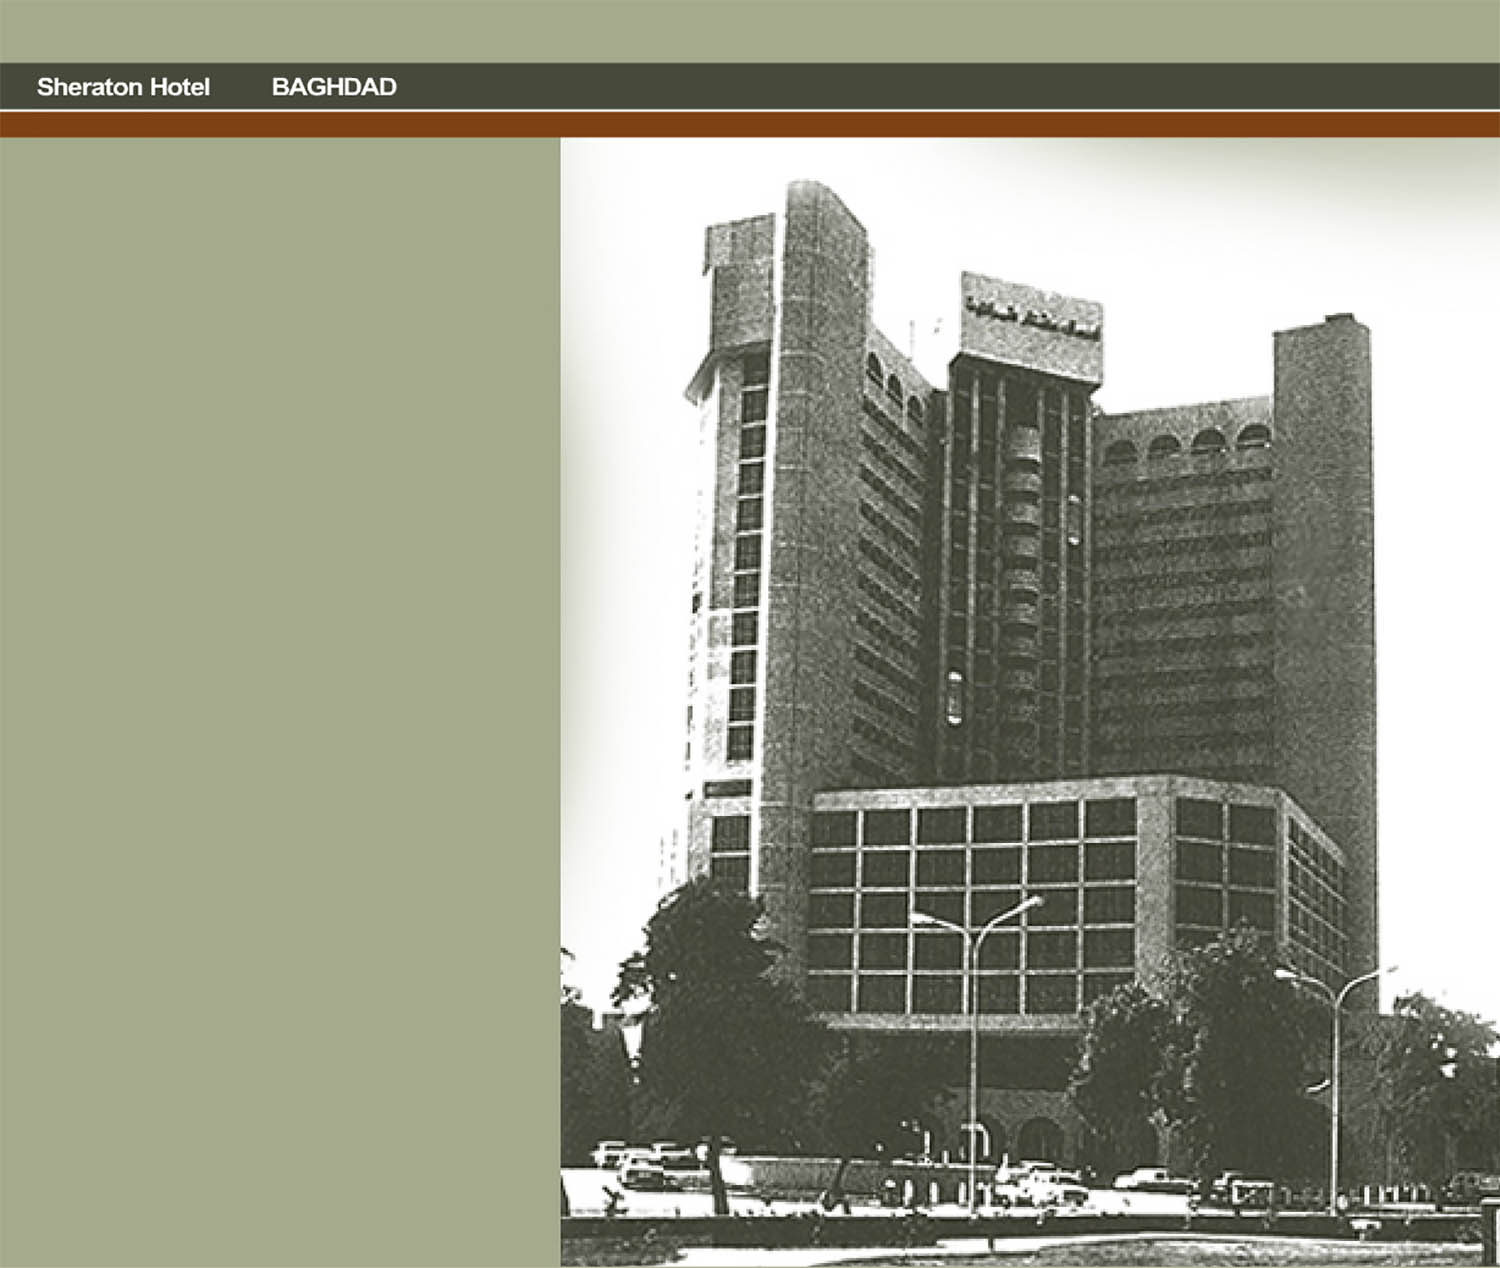 Digital image from the online portfolio of Hisham Munir and Associates, showing an exterior view of the Baghdad Sheraton.